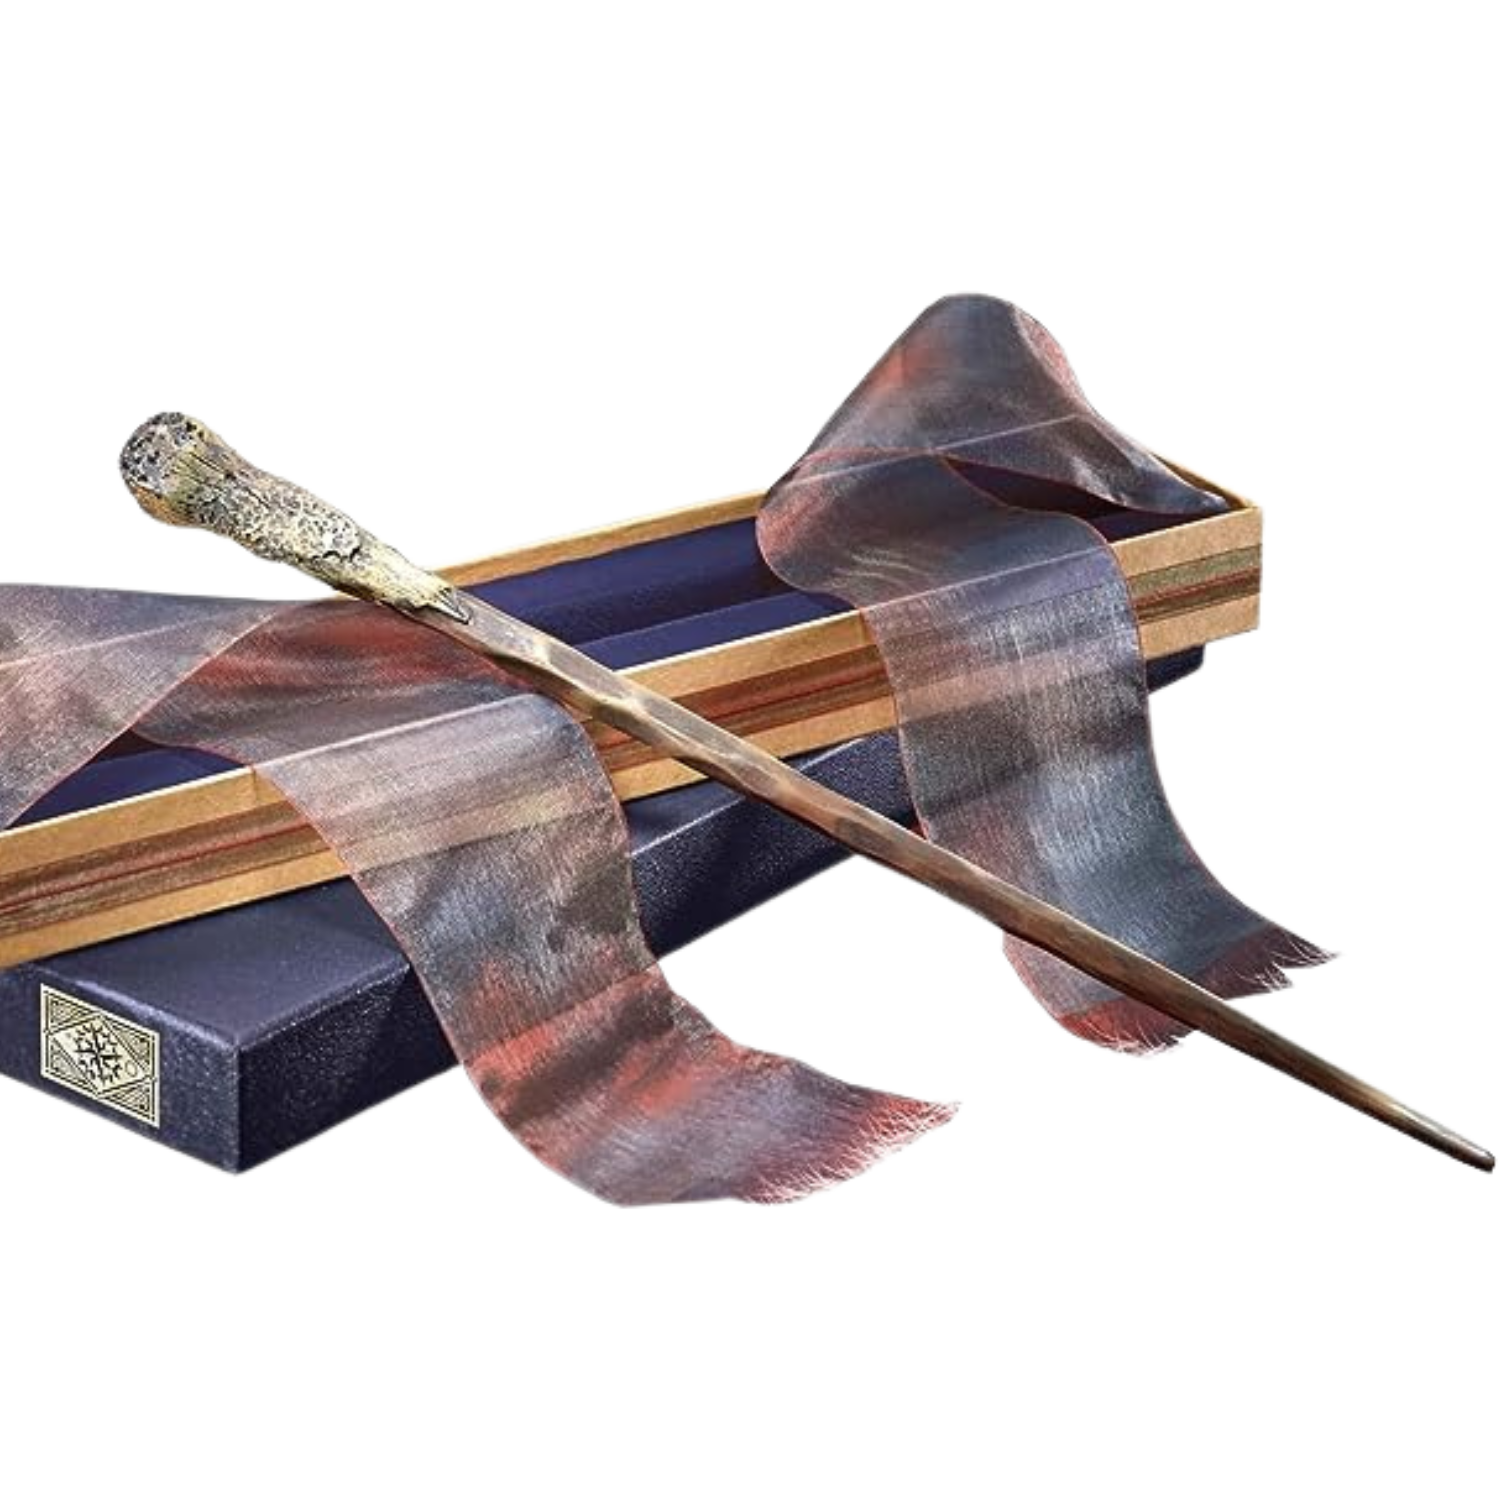 This image shows Ron Weasley's wand from the Harry Potter series leaning against a box